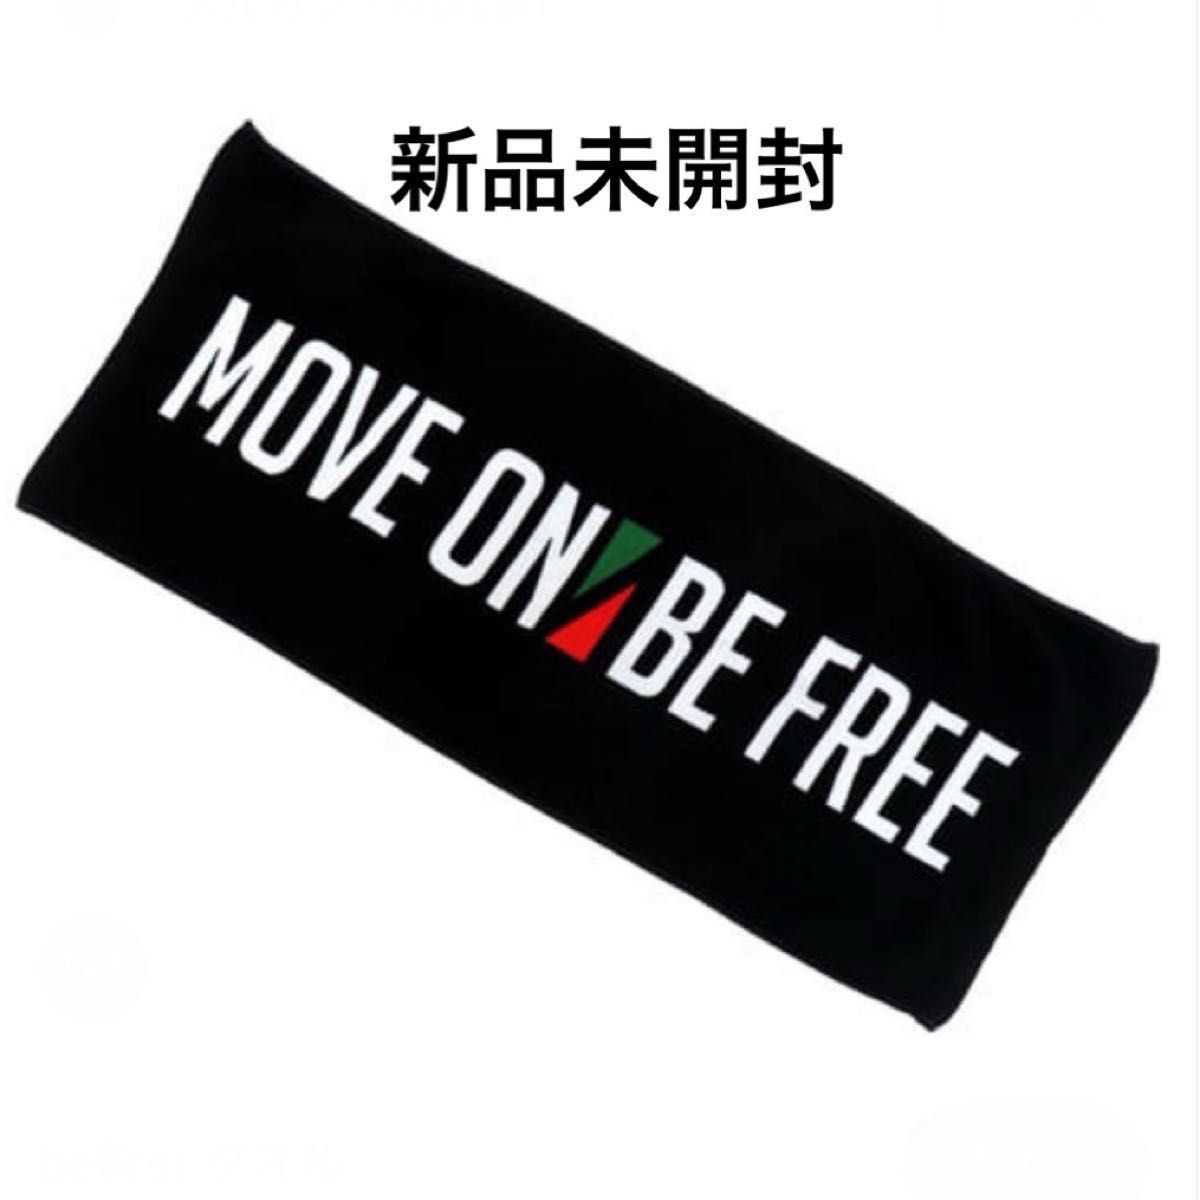 BE:FIRST THE FIRST クラファン 返礼品 フェイスタオル MOVE ON BE FREE 新品未開封